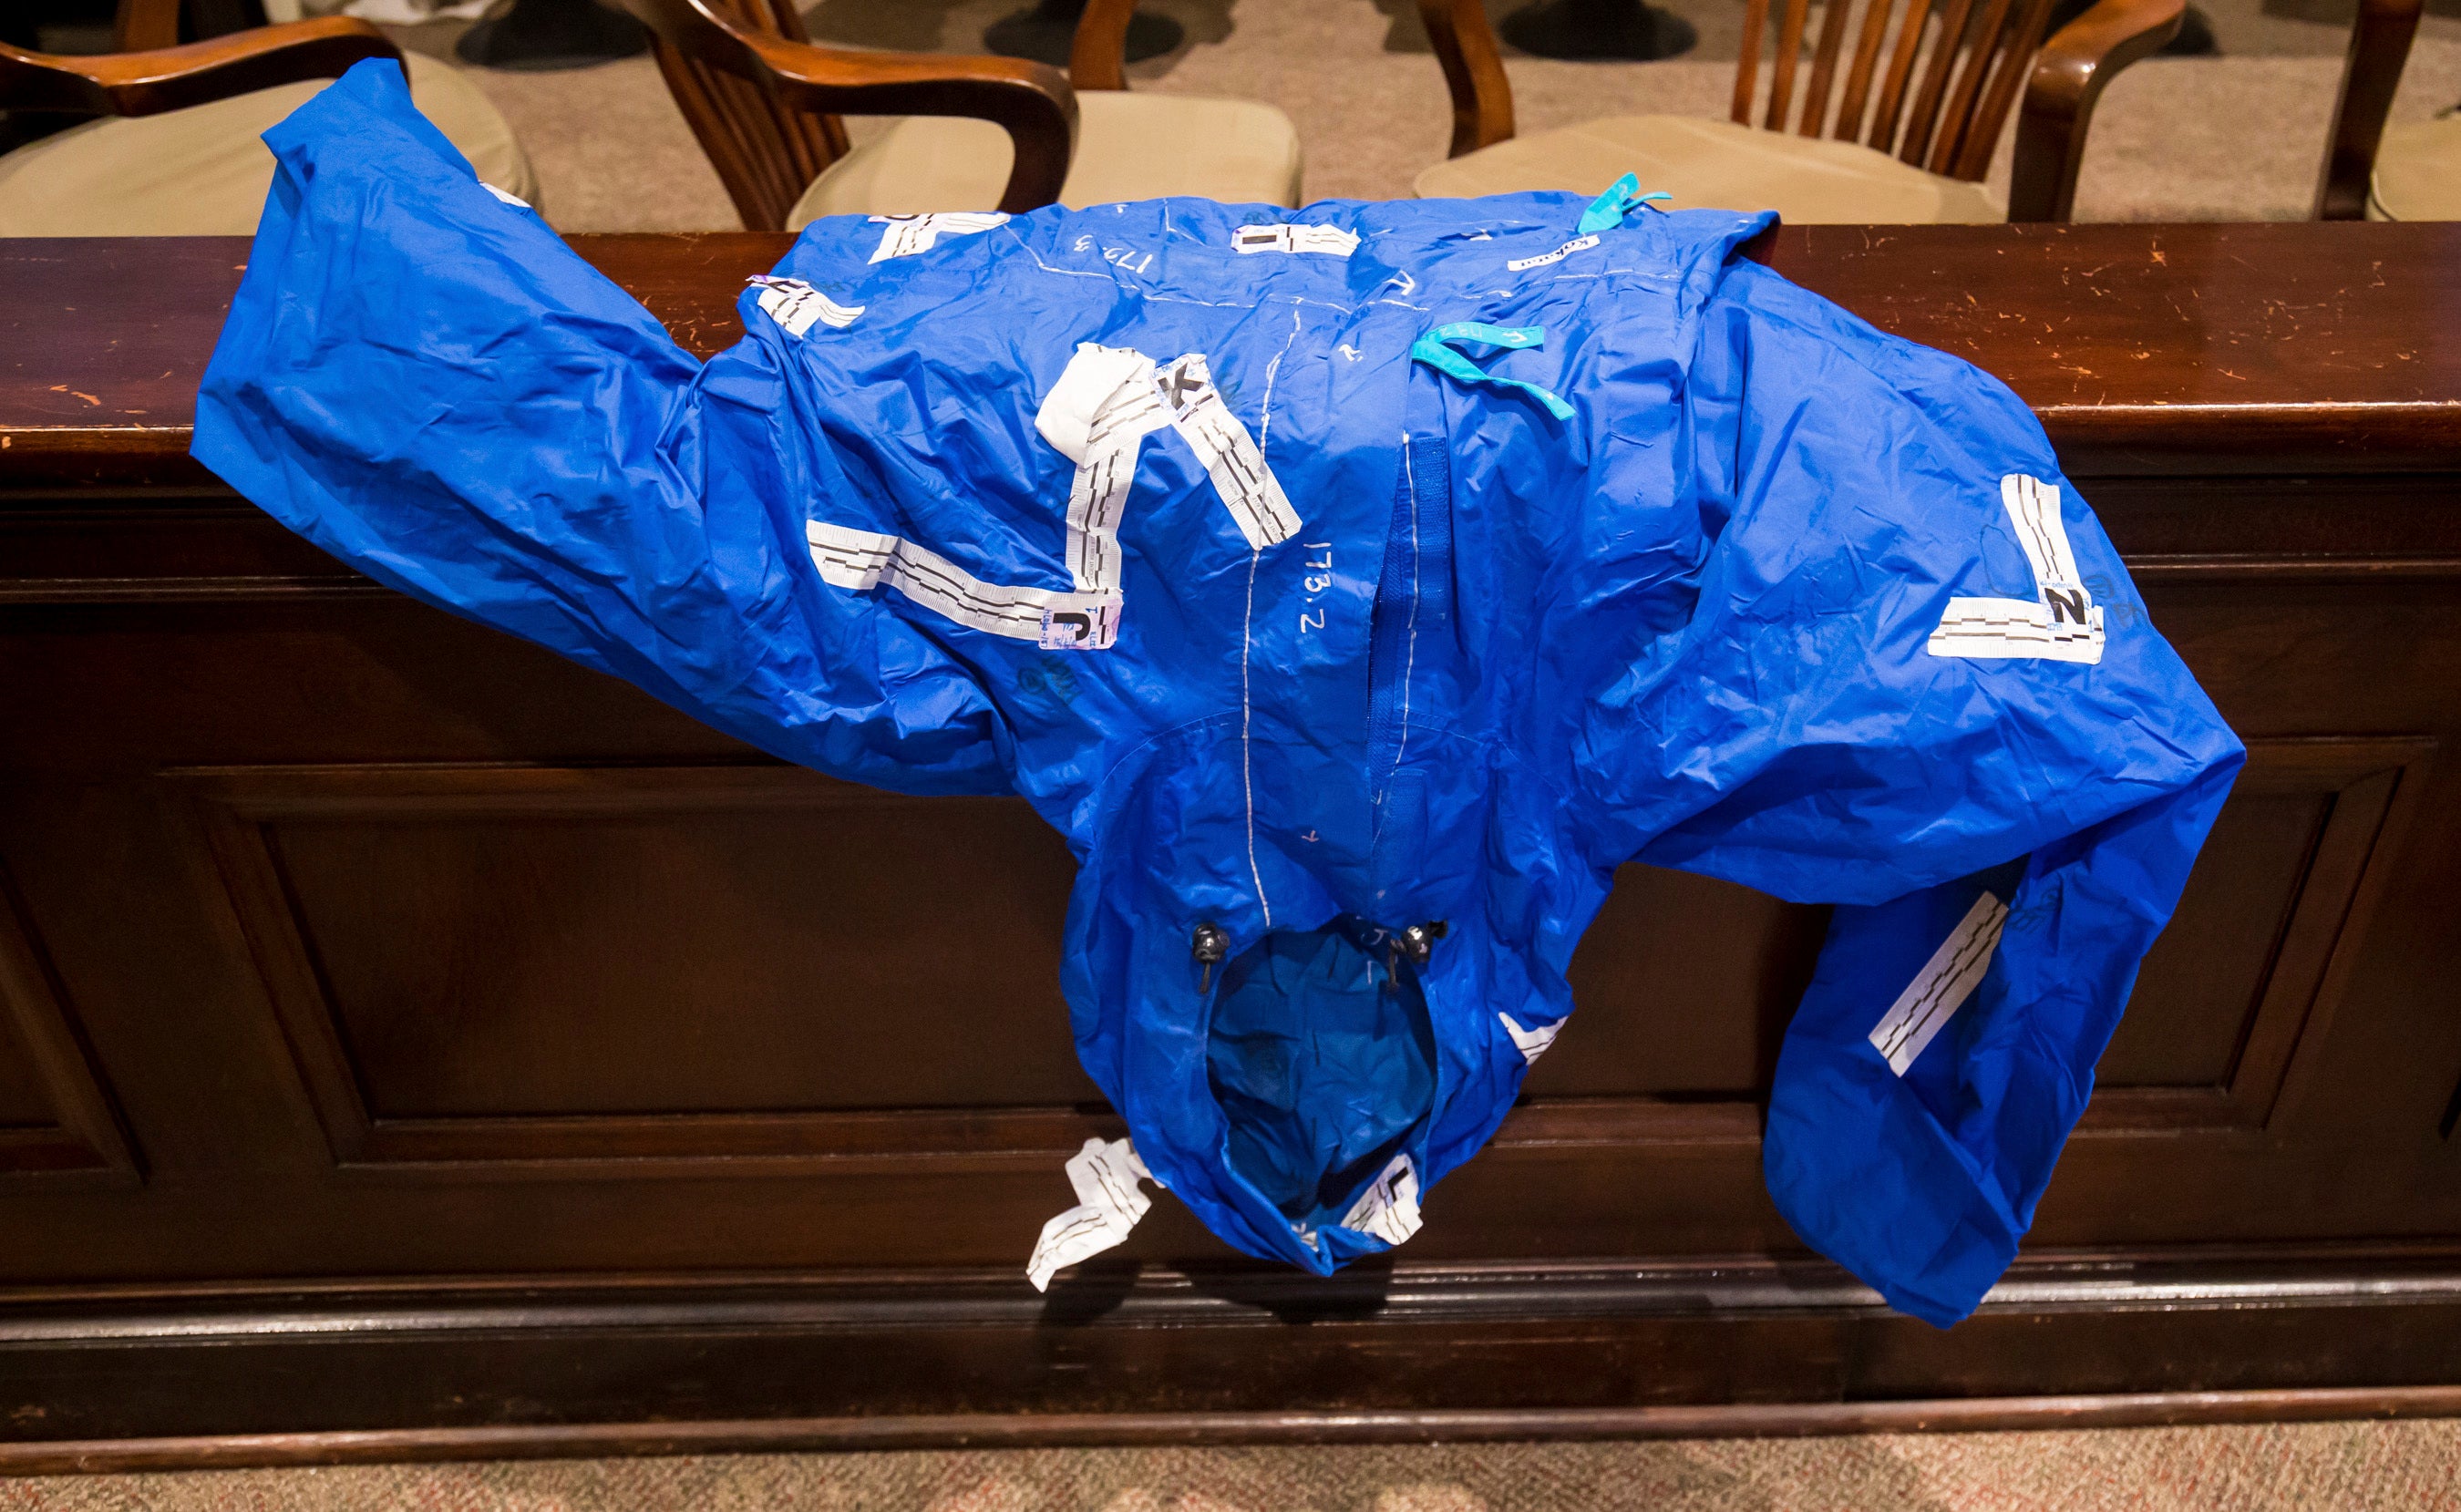 The blue raincoat which Mr Murdaugh allegedly transported the guns in